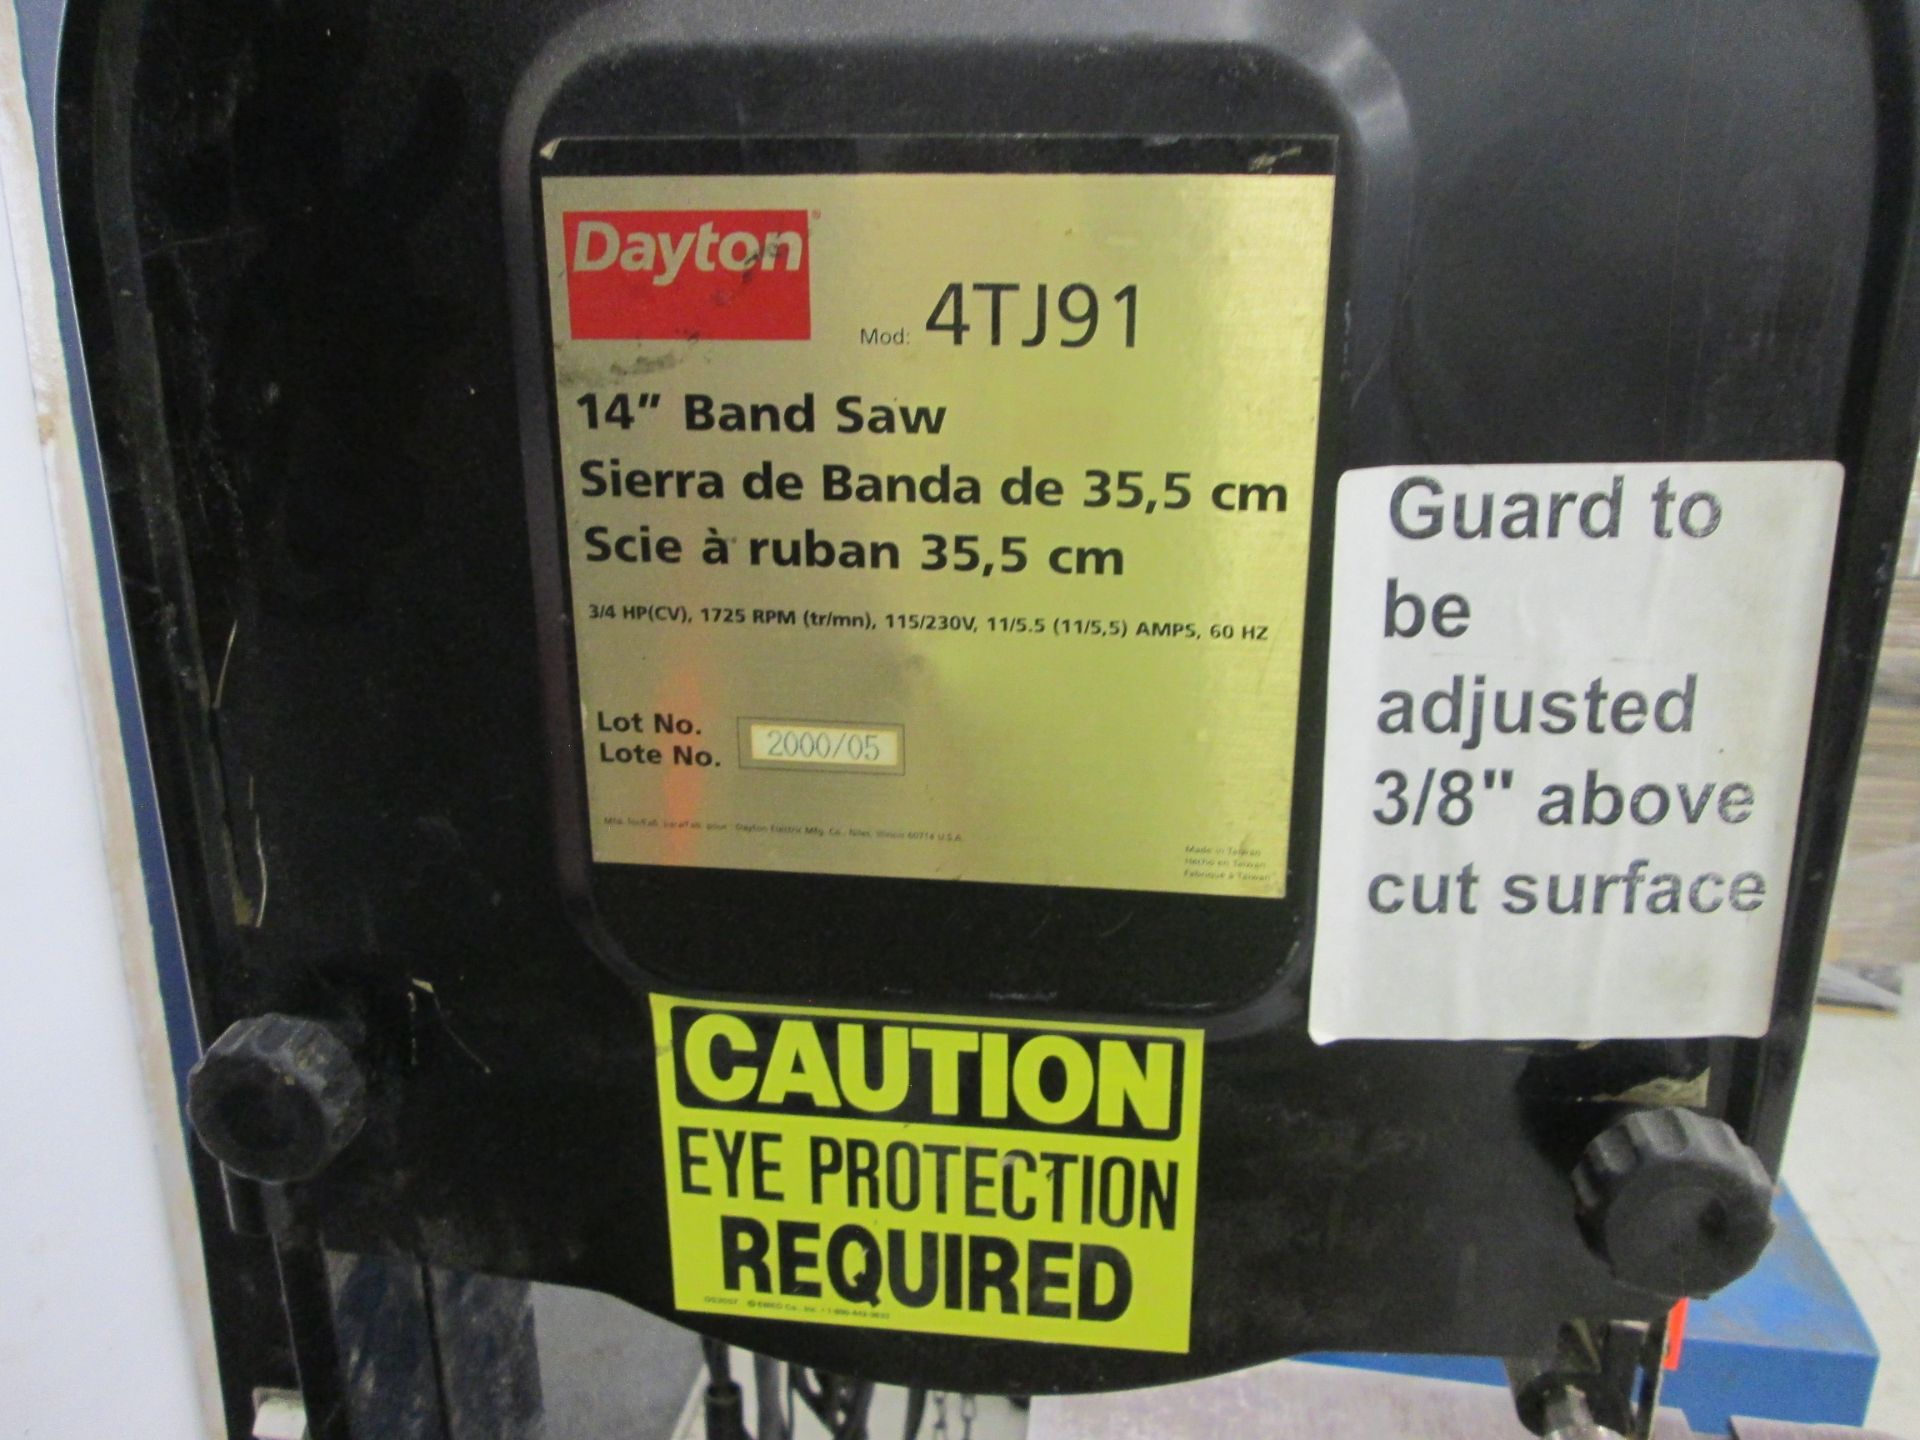 Craftsman 4TJ91, 14 in. vertical band saw - LOCATED AT 524 ROUTE 7 SO., MILTON, VT - Image 3 of 3